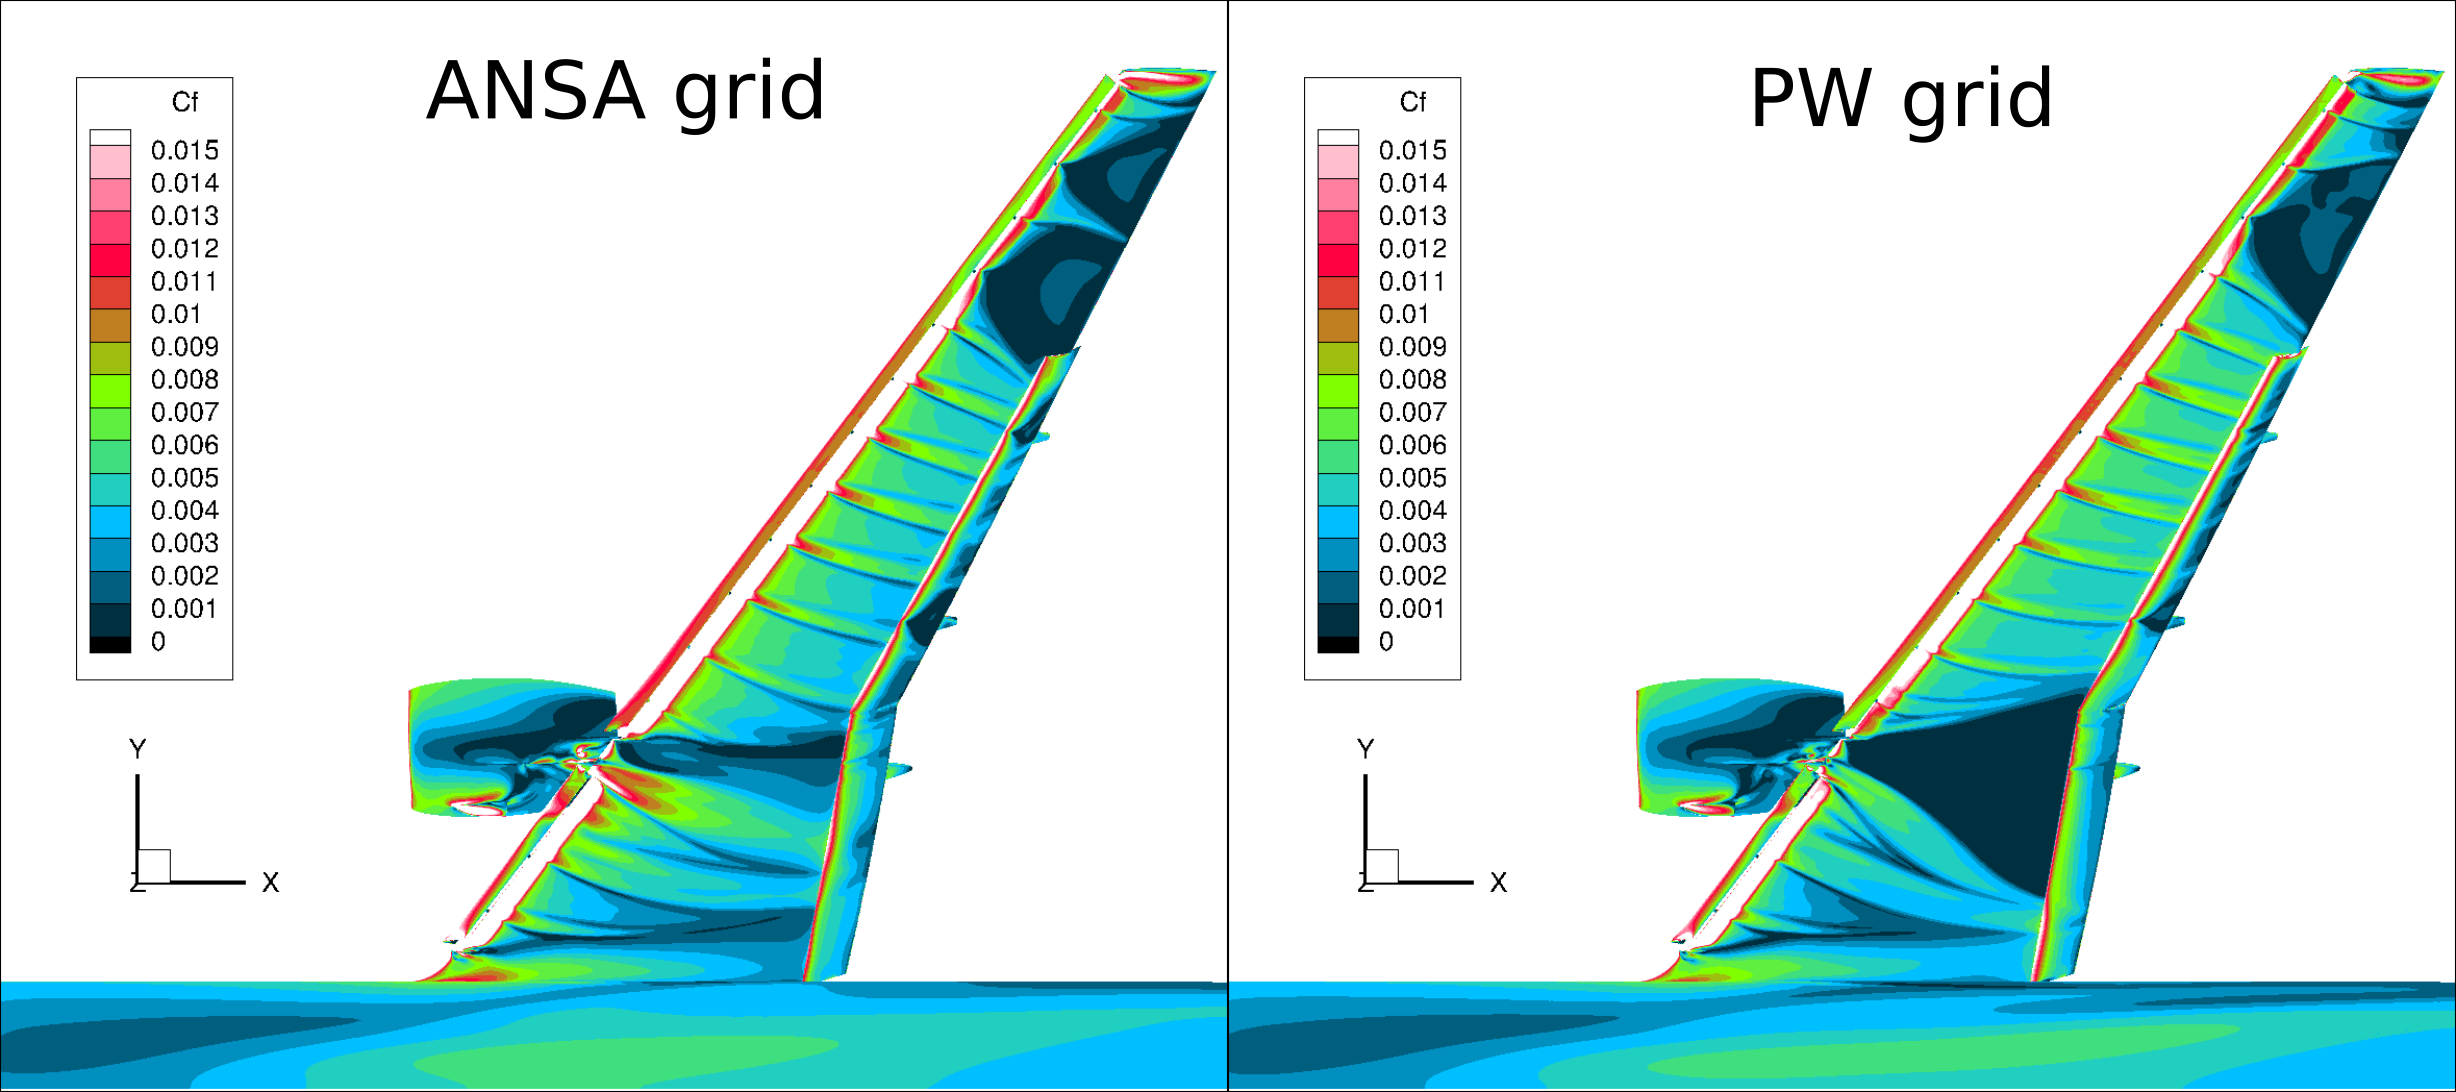 Skin friction behavior for ANSA grid and PW grid at a = 19.57